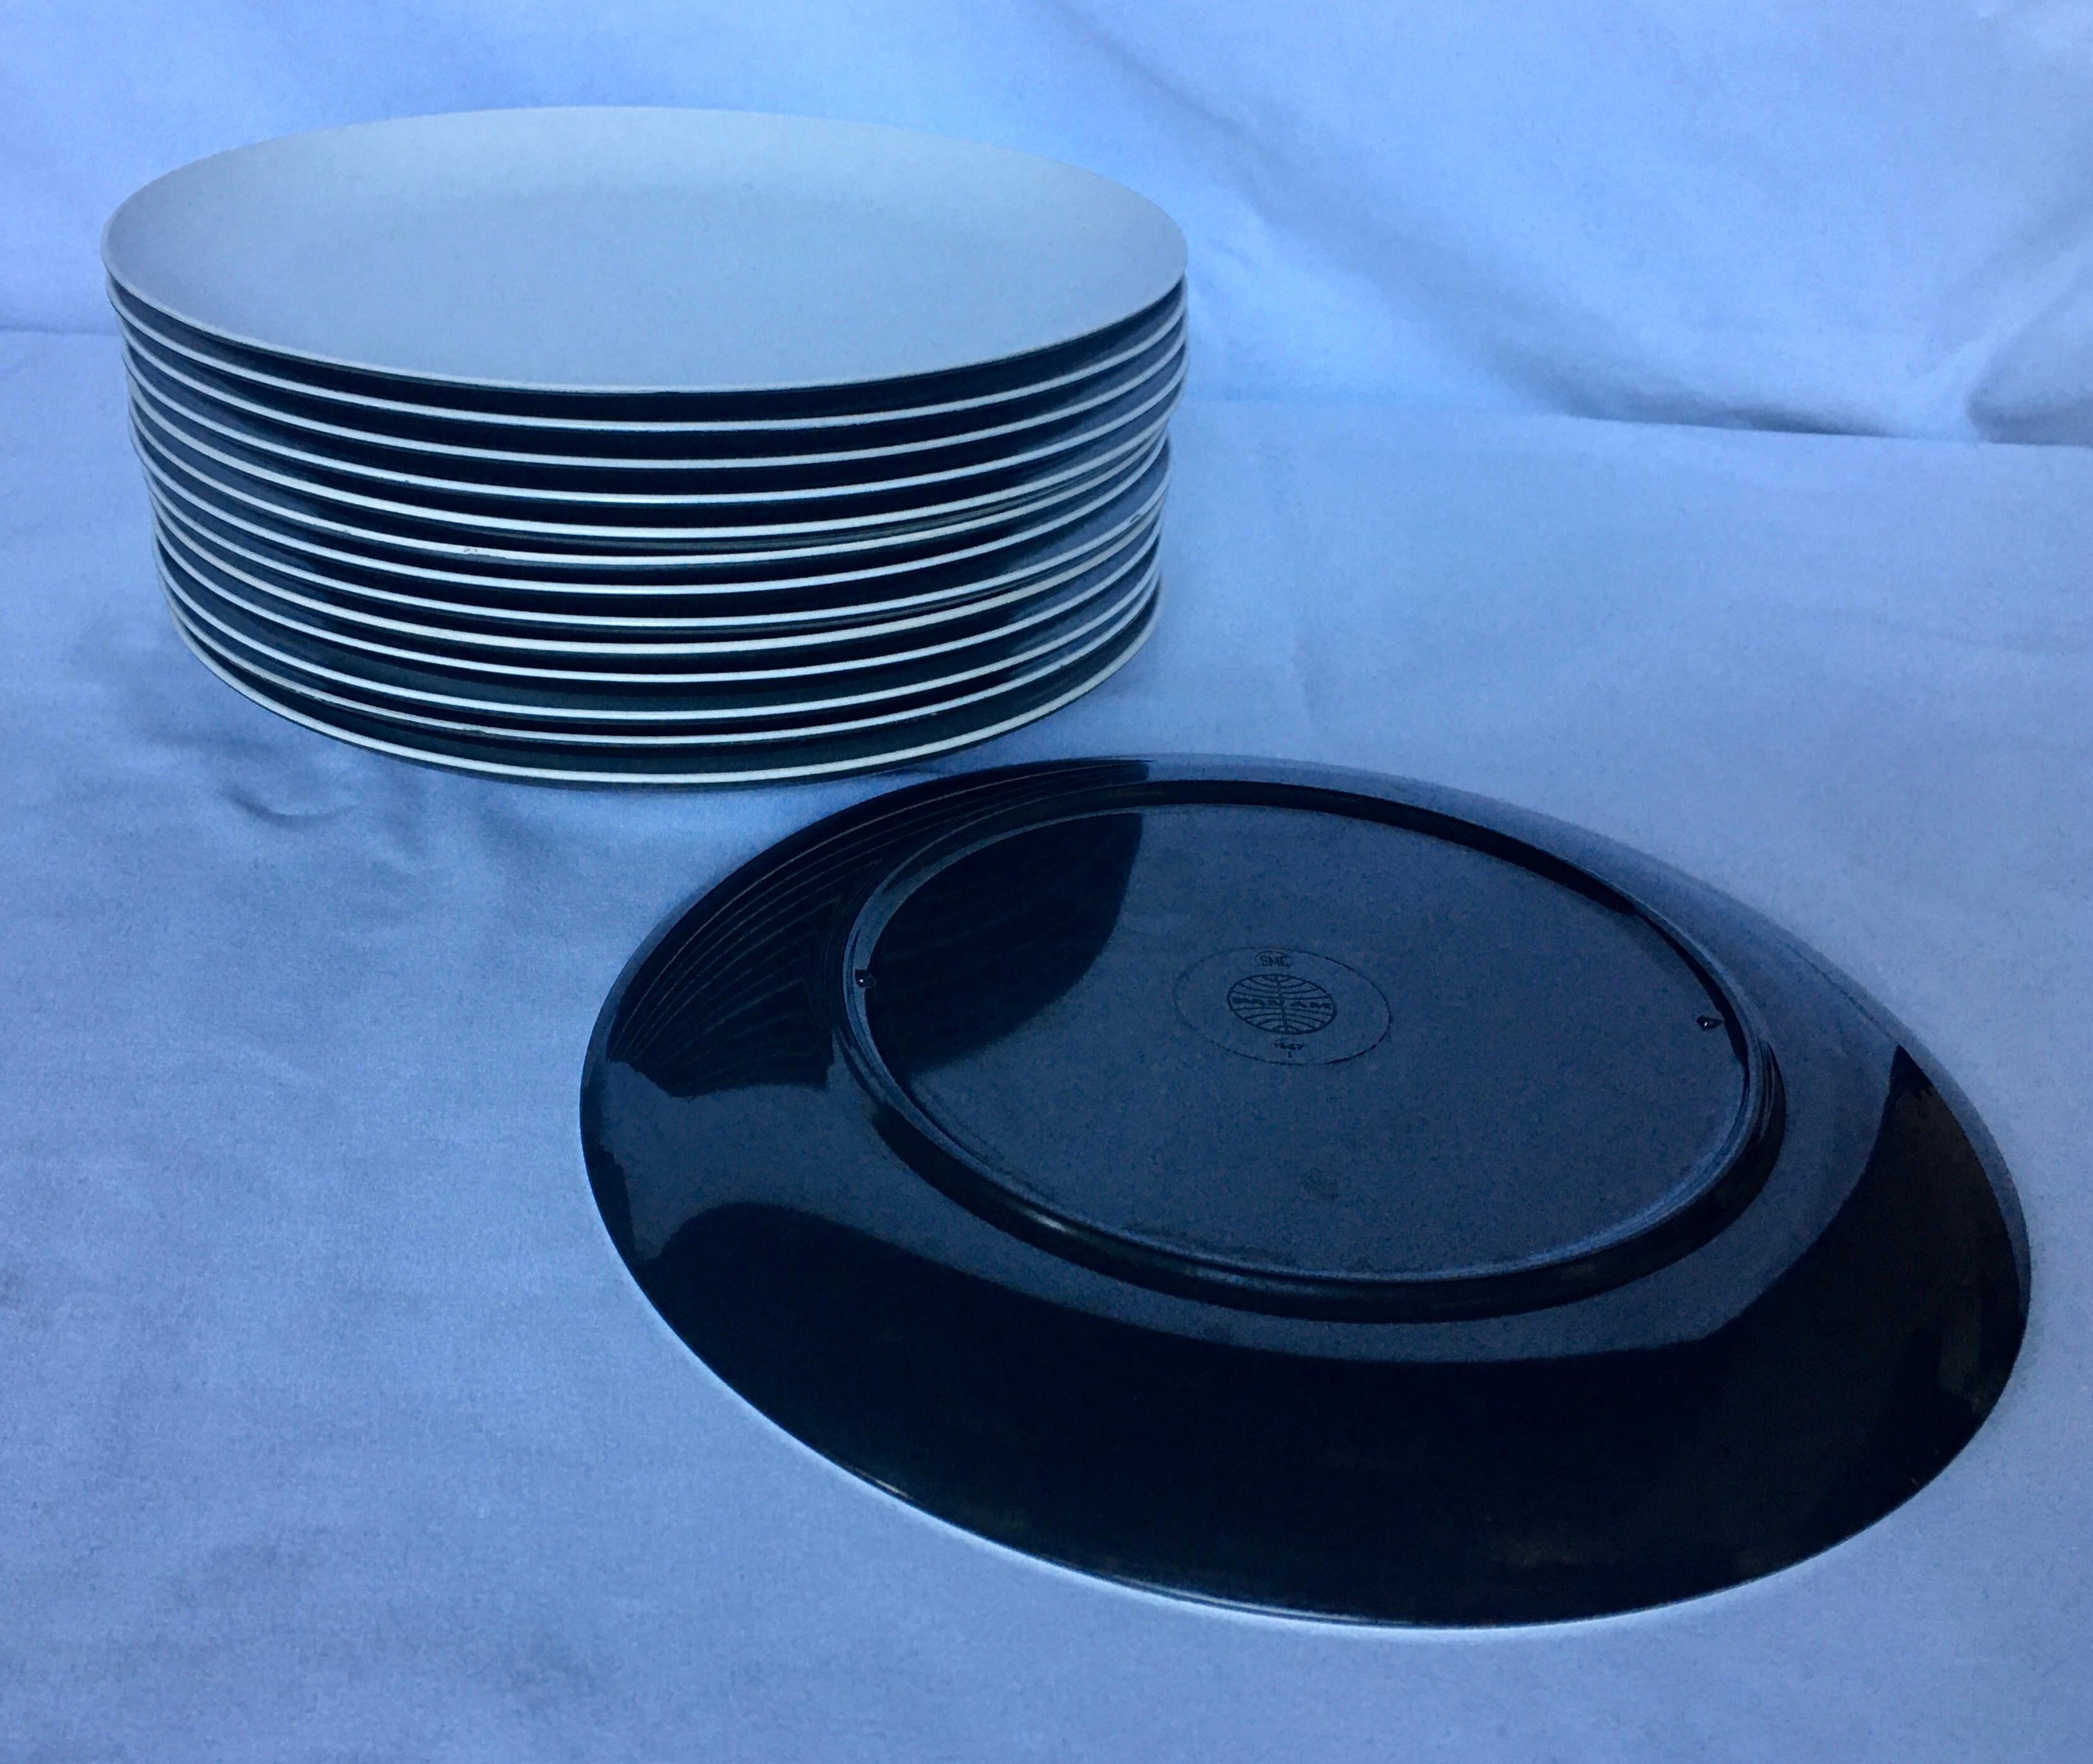 Mid-Century Modern Pan Am Airlines Melamine Plates Dinnerware Service, 1960s For Sale 1